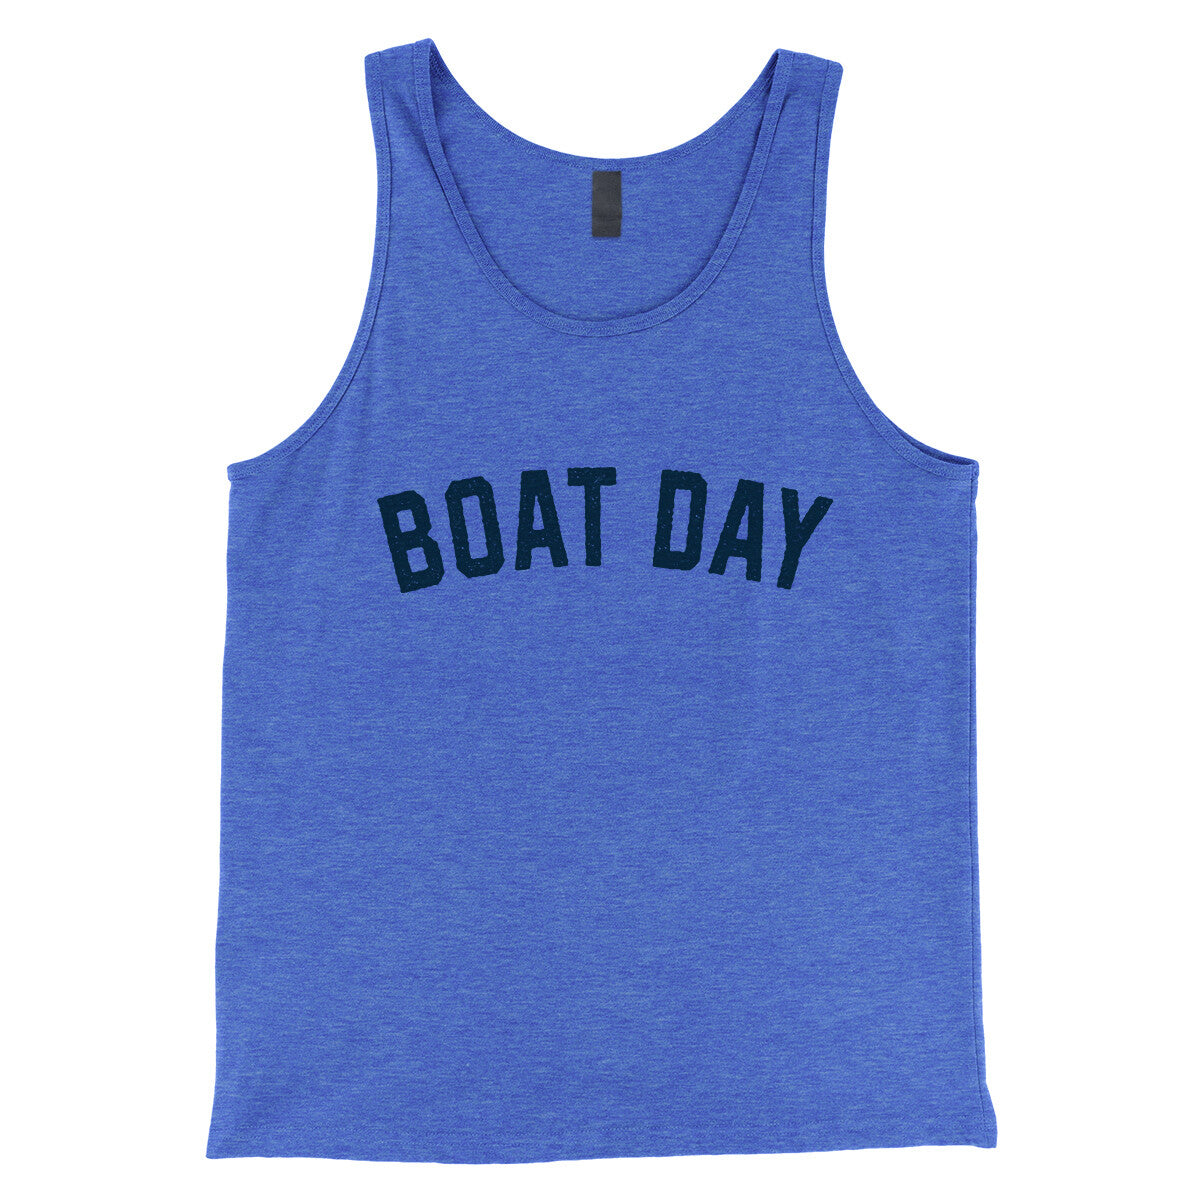 Boat Day in True Royal TriBlend Color